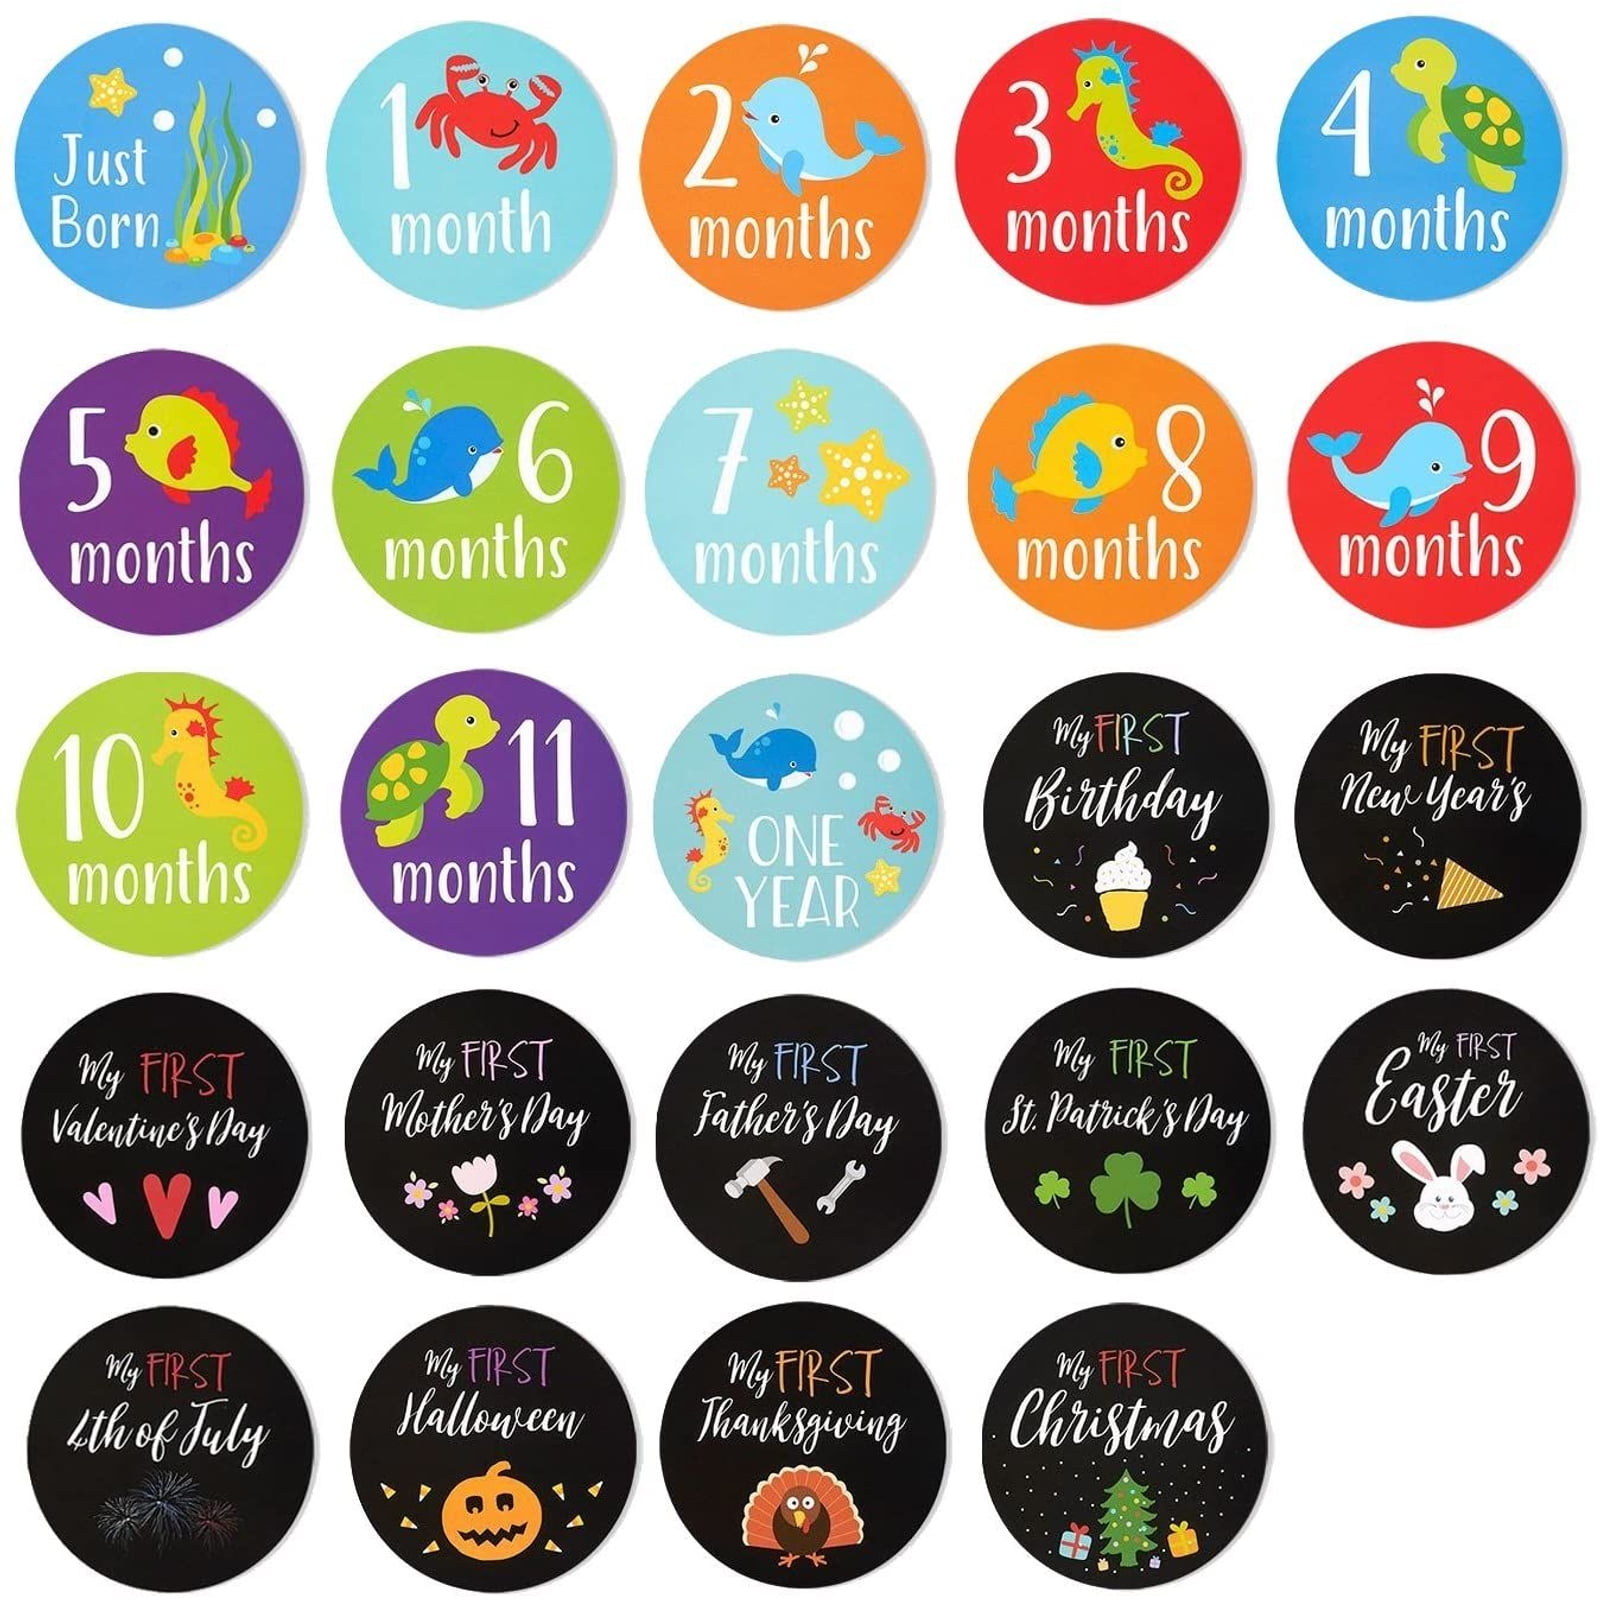 Baby Milestone Stickers Keepsake Journal and Baby Pictures 4.4 inches in Diameter Christmas for Baby Scrapbook Thanksgiving 24-Count First Year Baby Monthly Stickers Including Birthday